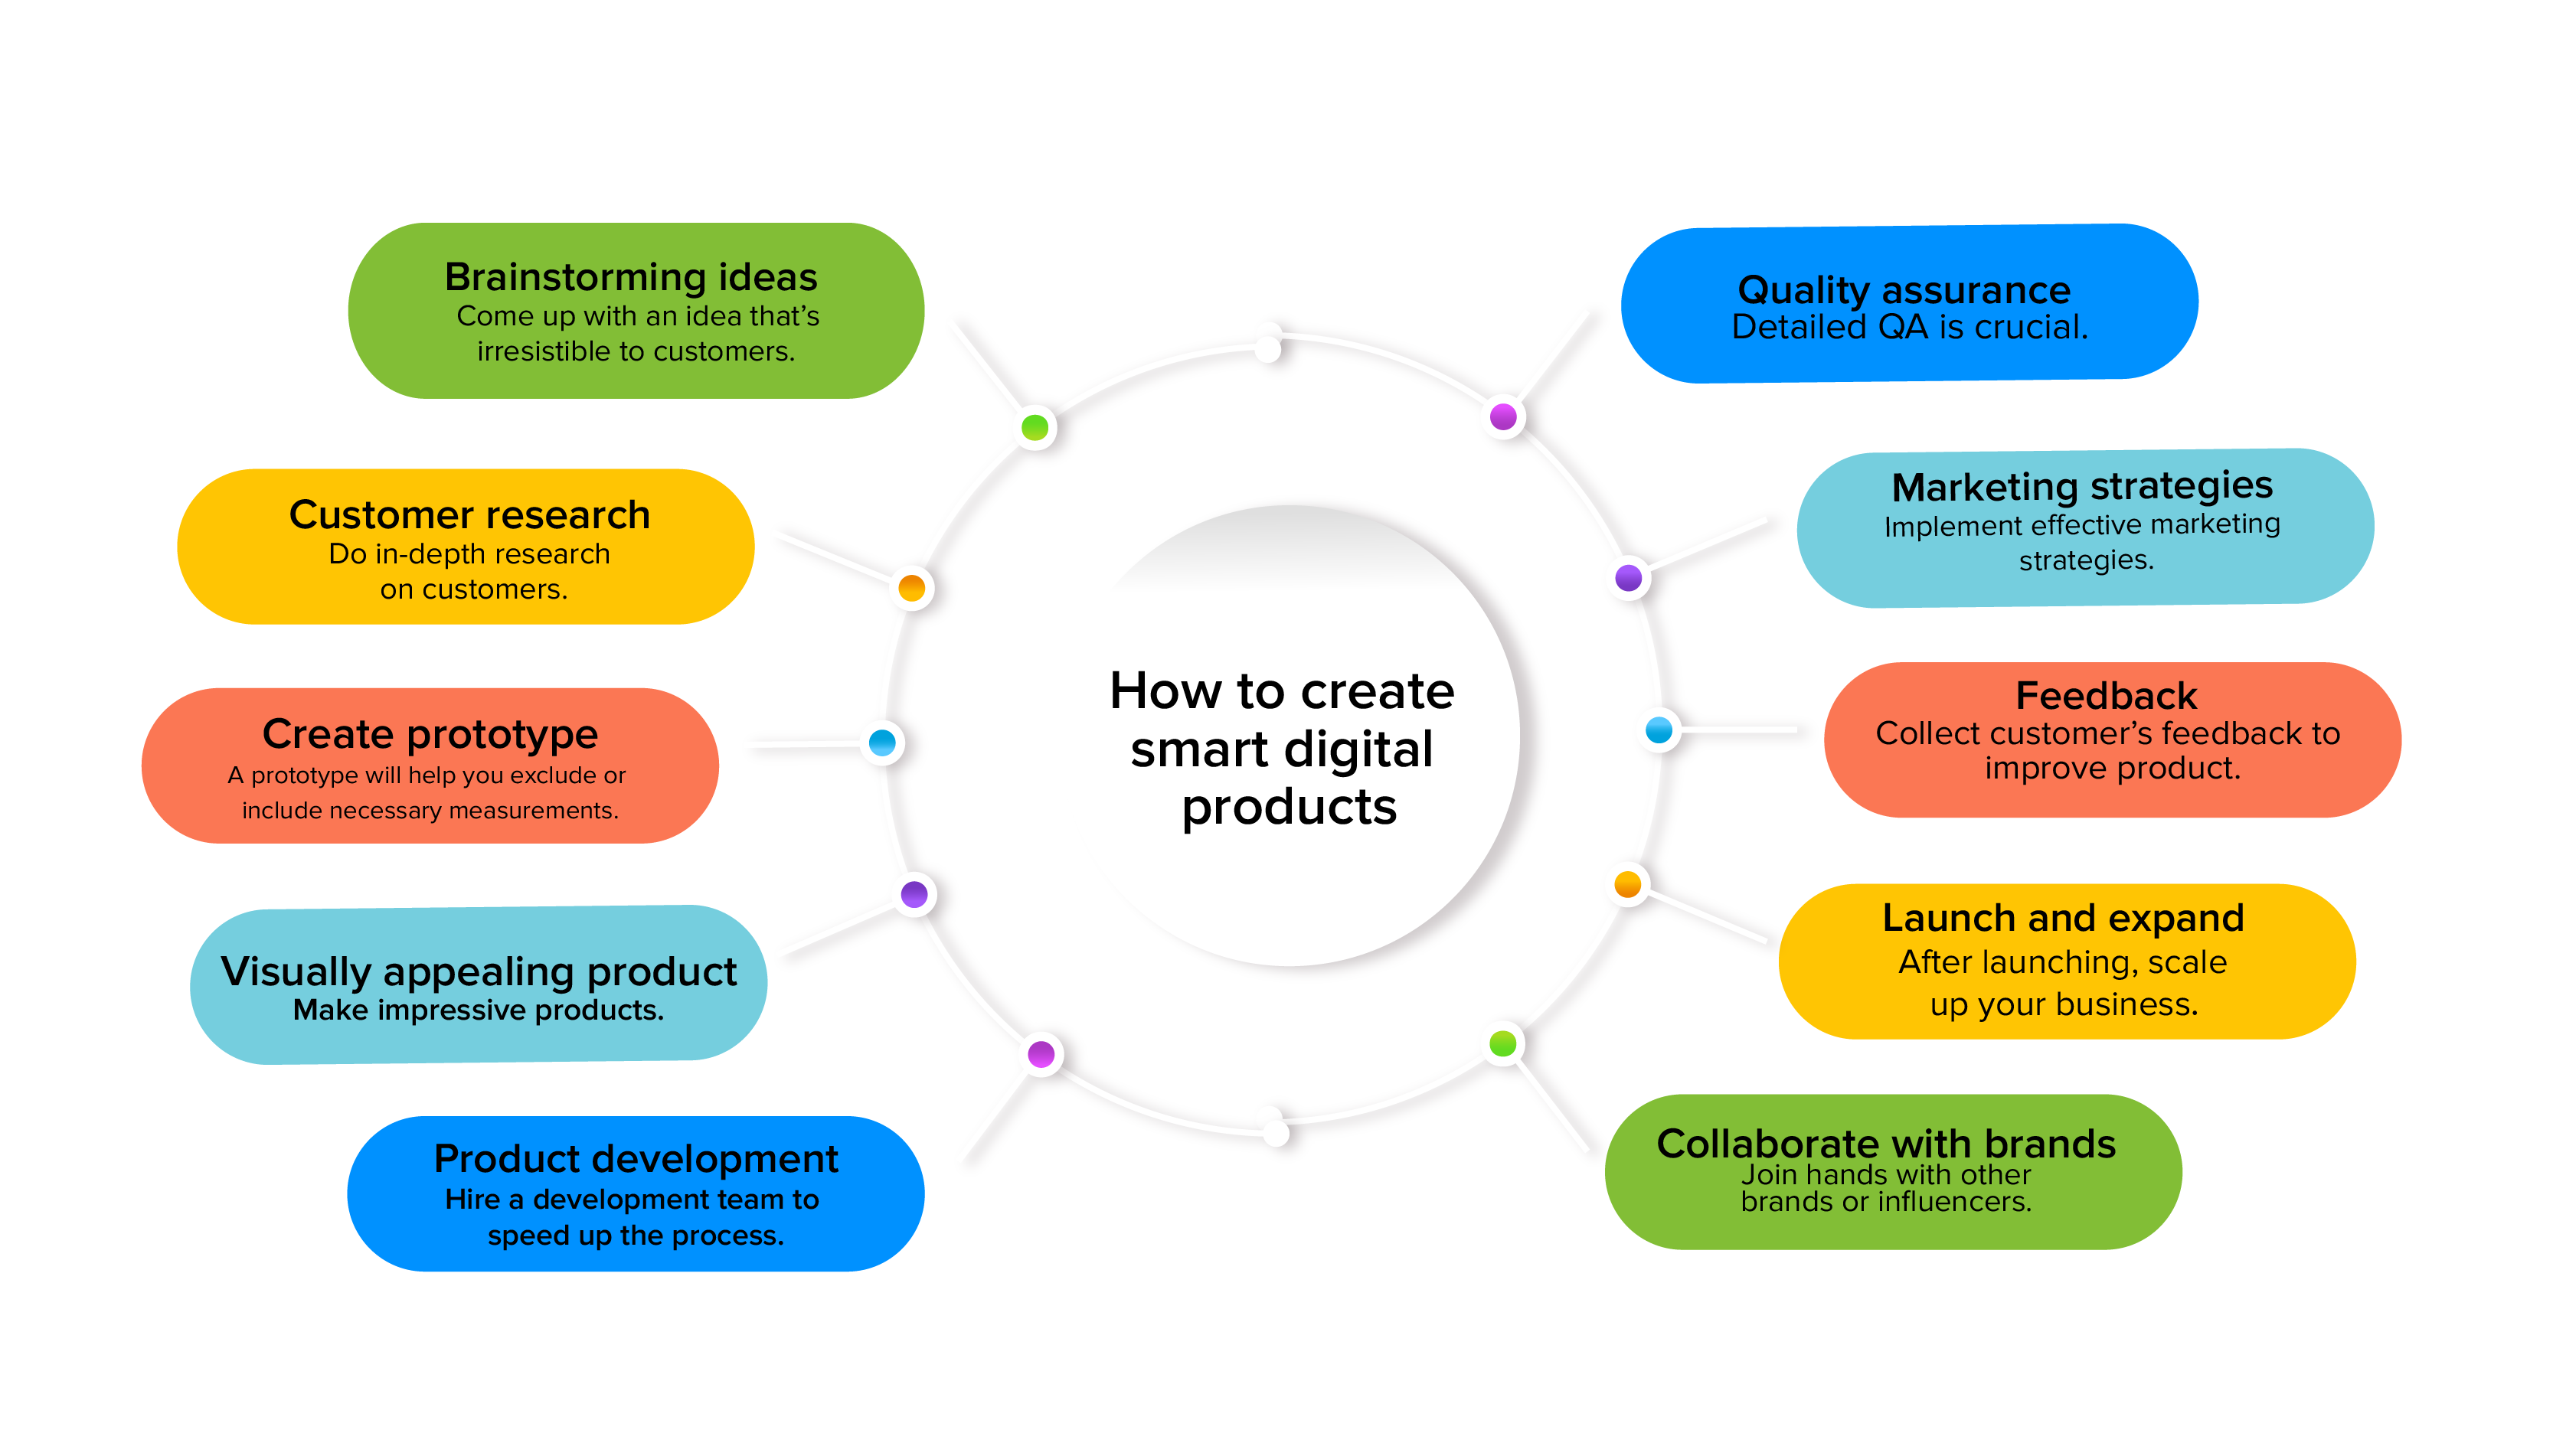 How to create smart digital products